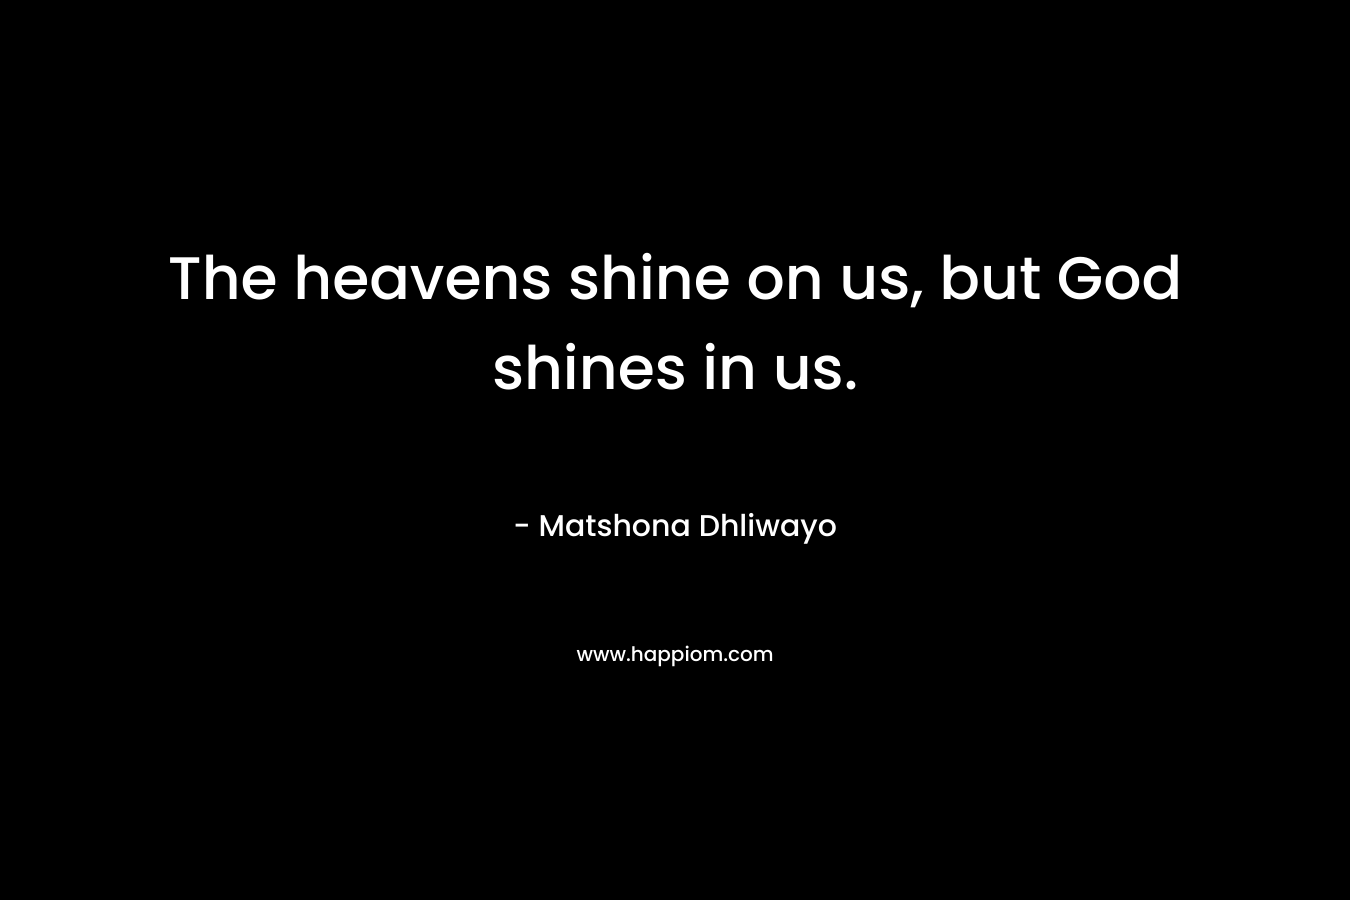 The heavens shine on us, but God shines in us.